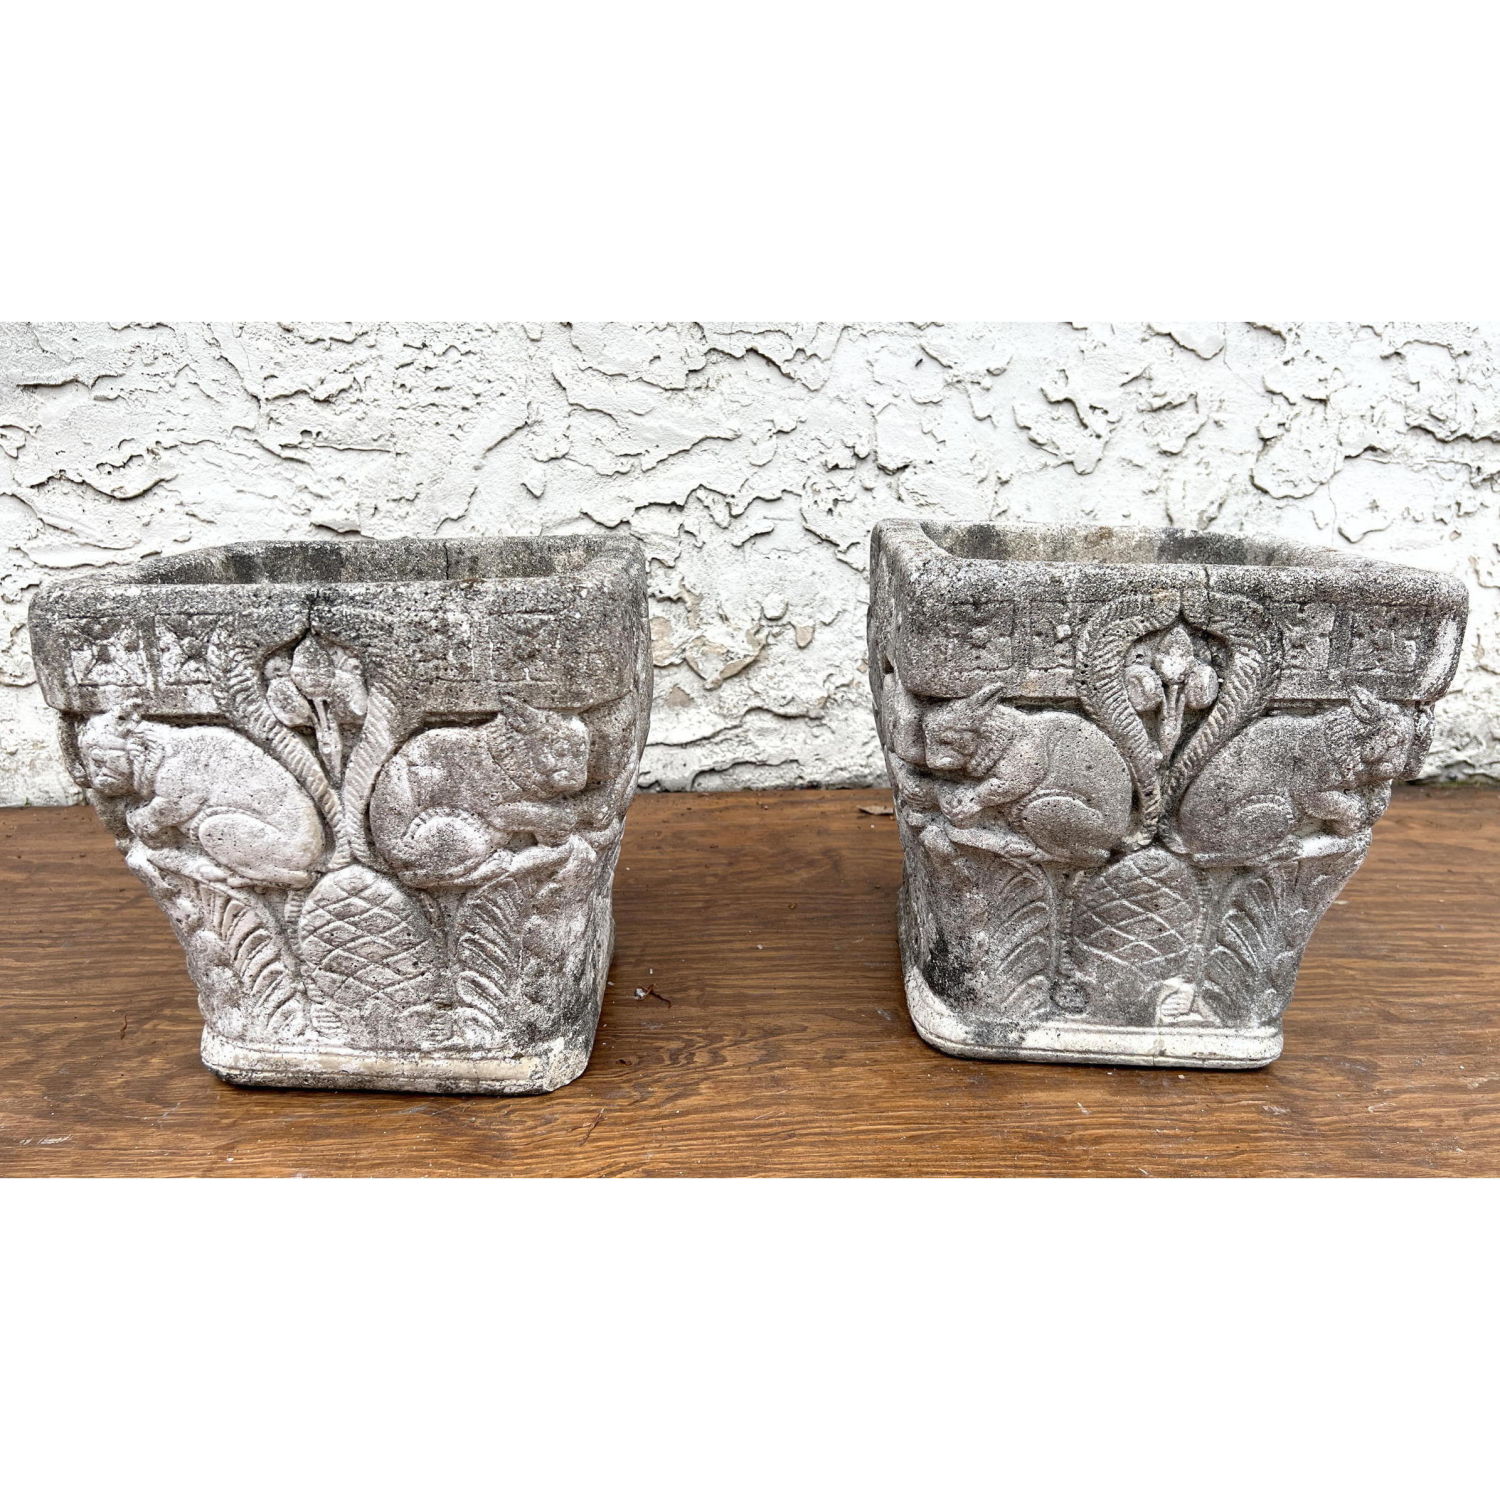 Pair Cast Stone Planter with Squirrels  2ba1b8